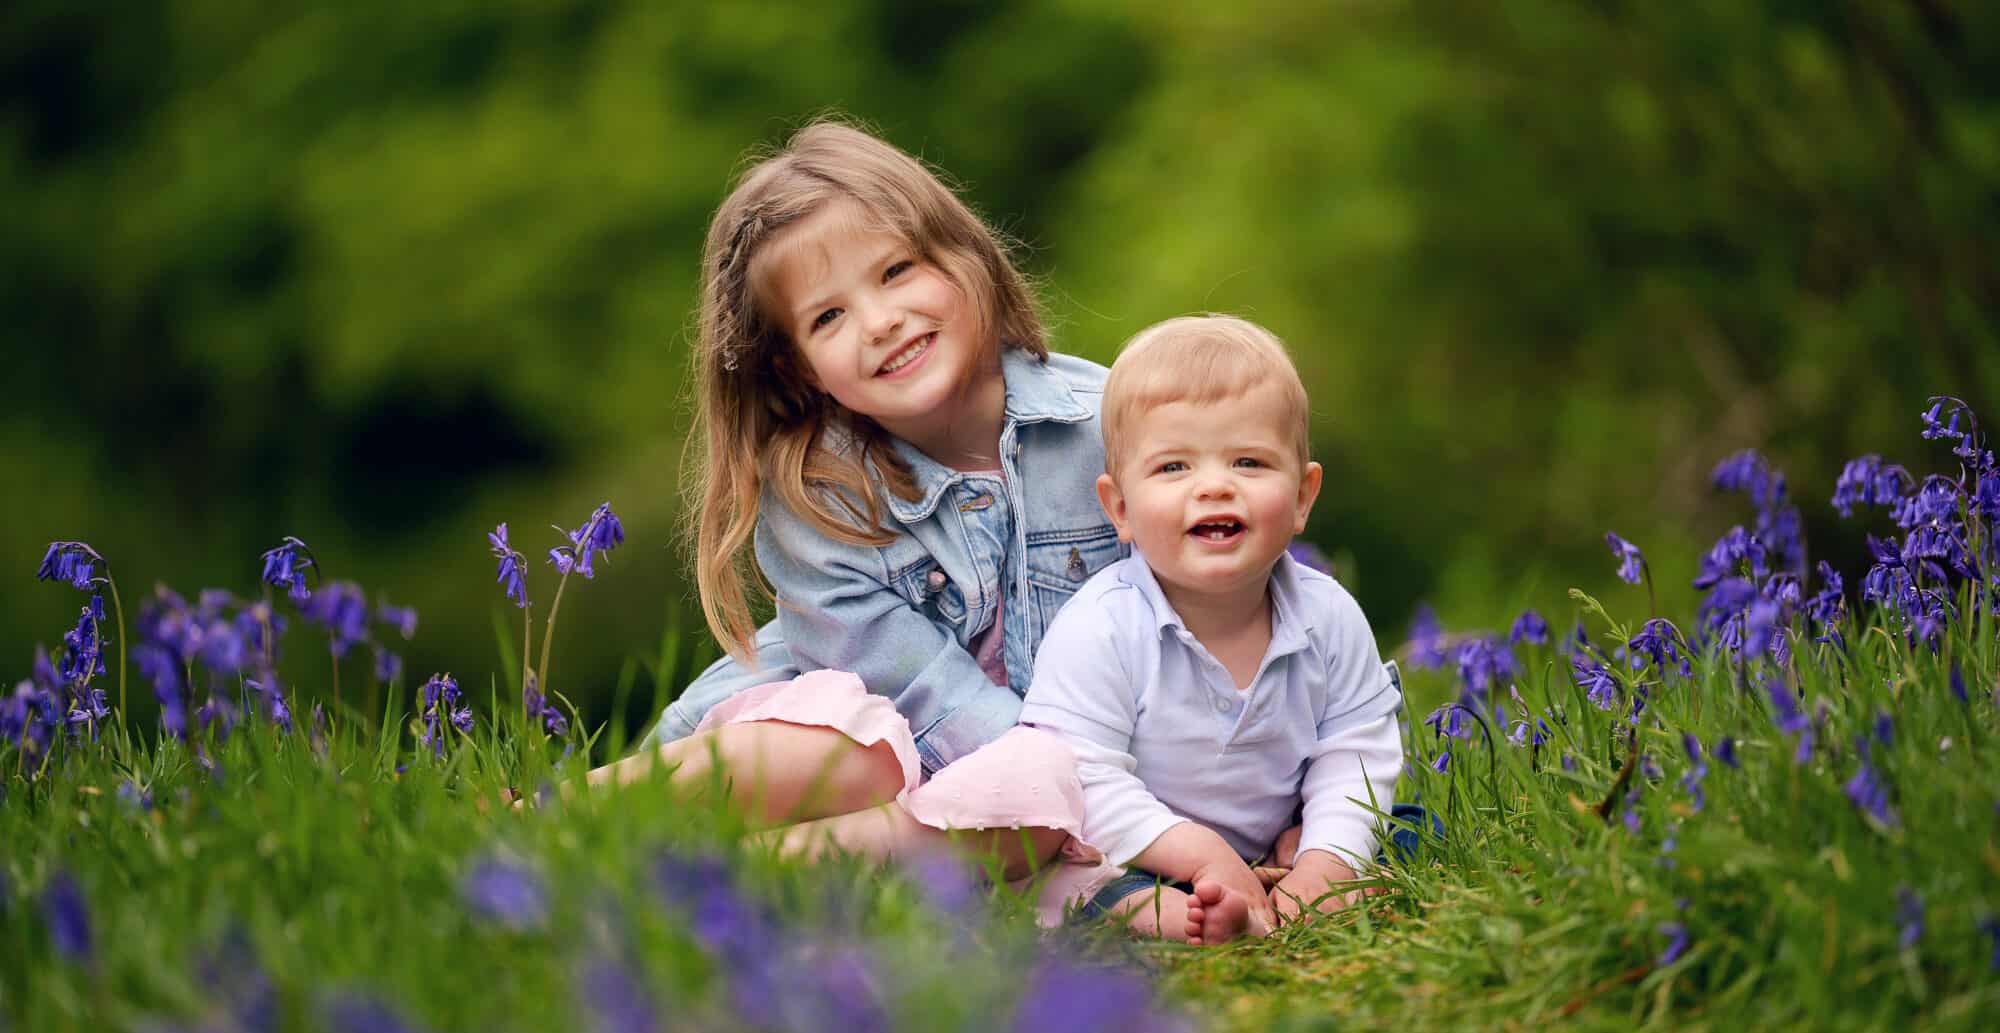 Beautiful family photograph of sister and baby brother sitting in a patch of bluebells.